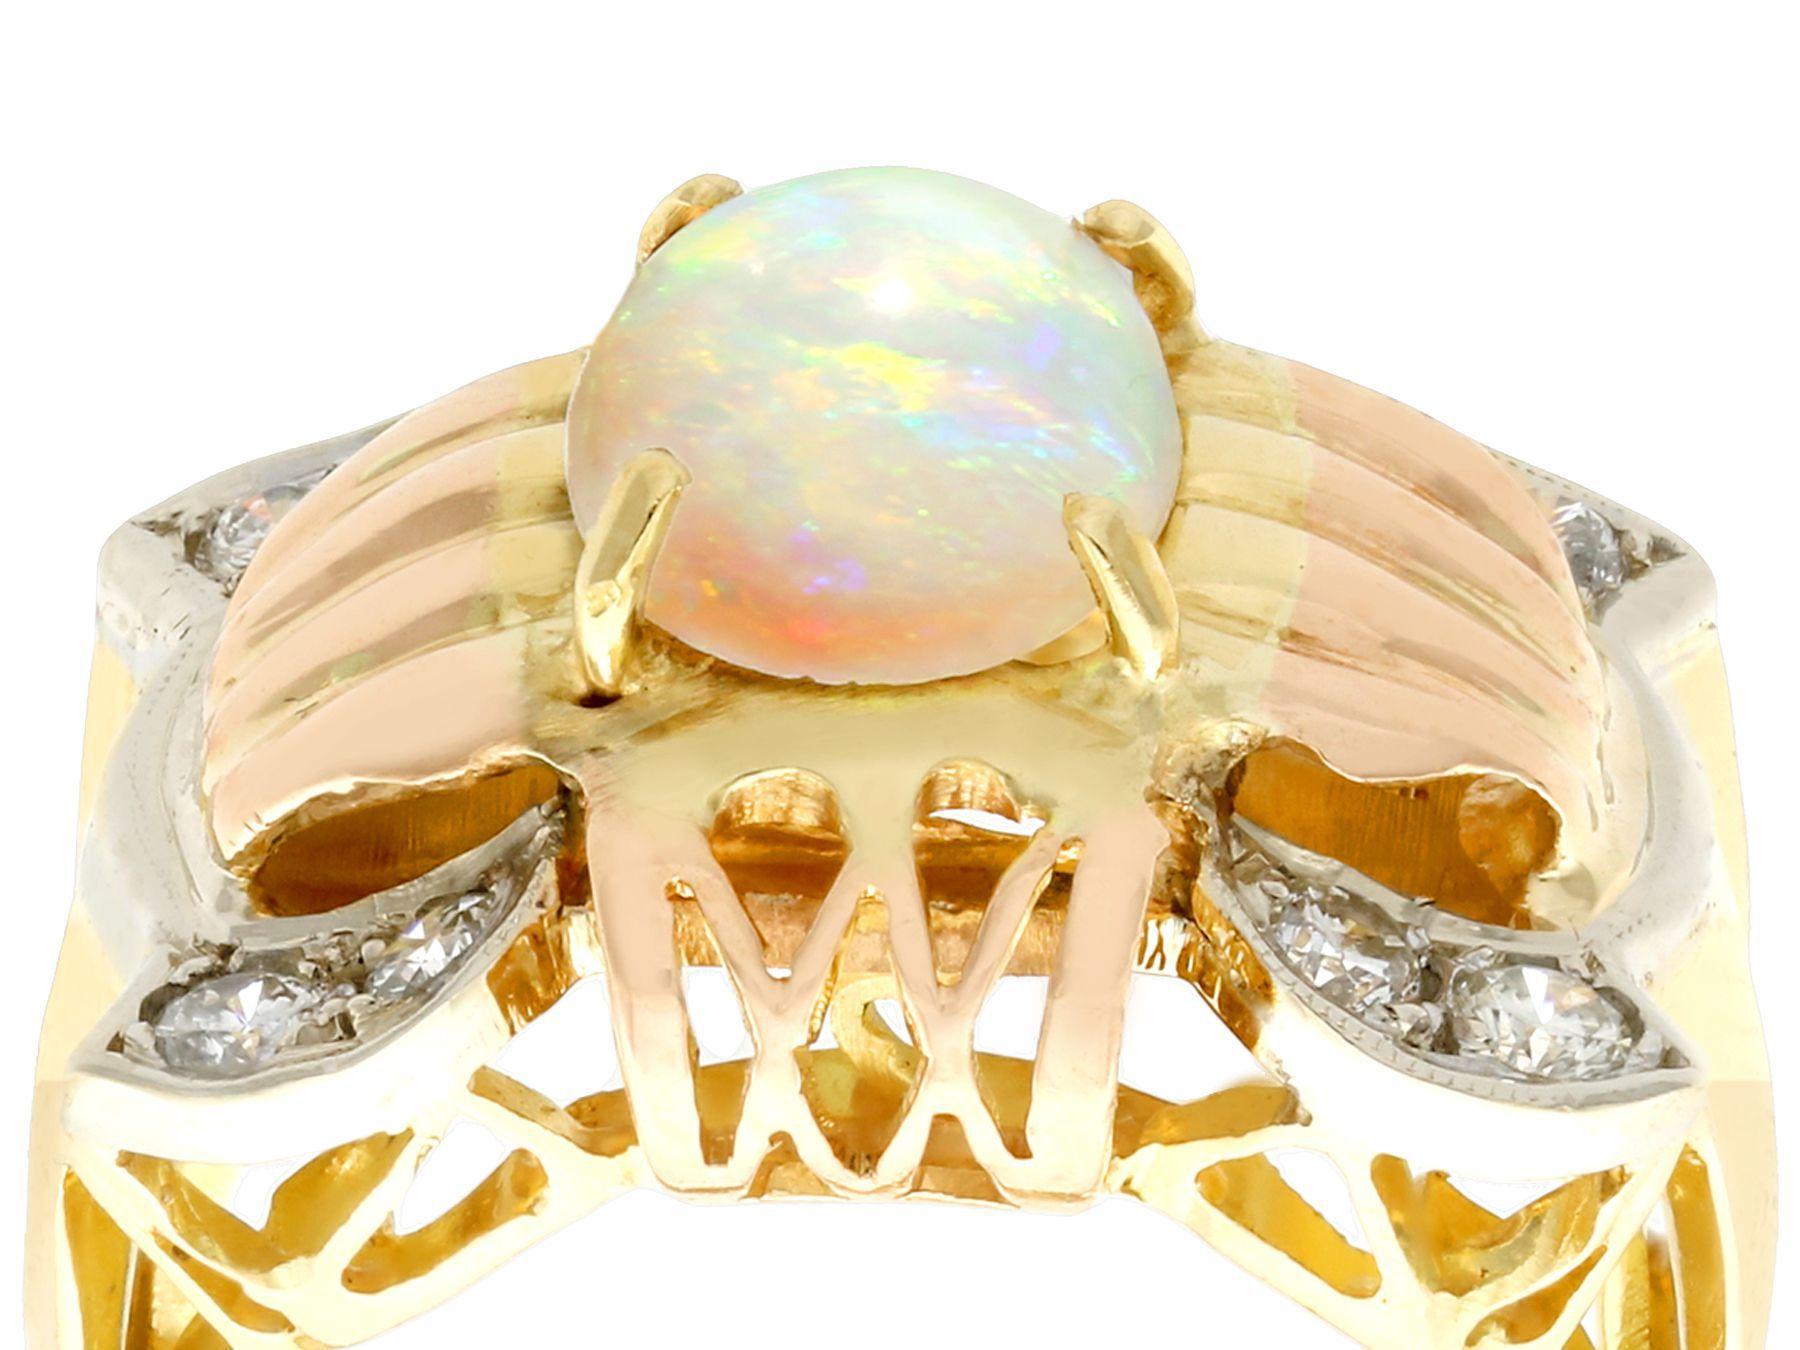 A stunning vintage 1.55 carat white opal and 0.52 carat diamond, 18 karat yellow, rose and white gold dress ring; part of our diverse antique jewelry and estate jewelry collections.

This stunning, fine and impressive opal band ring has been crafted